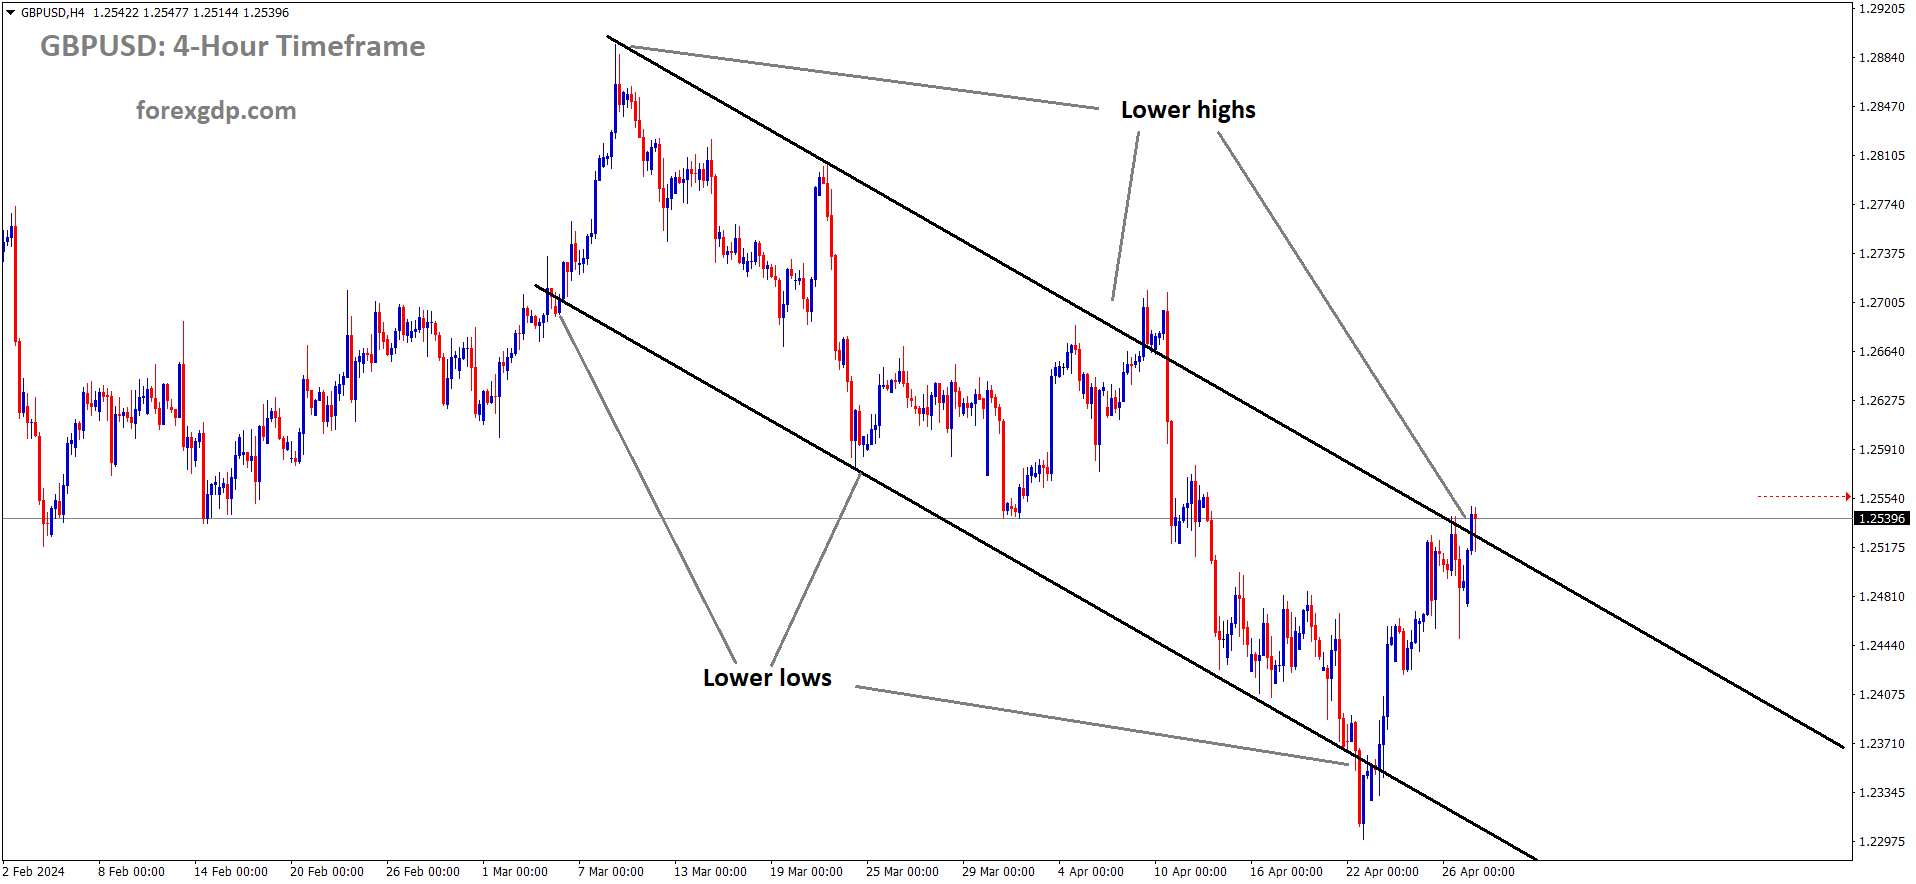 GBPUSD is moving in the Descending channel and the market has reached the lower high area of the channel